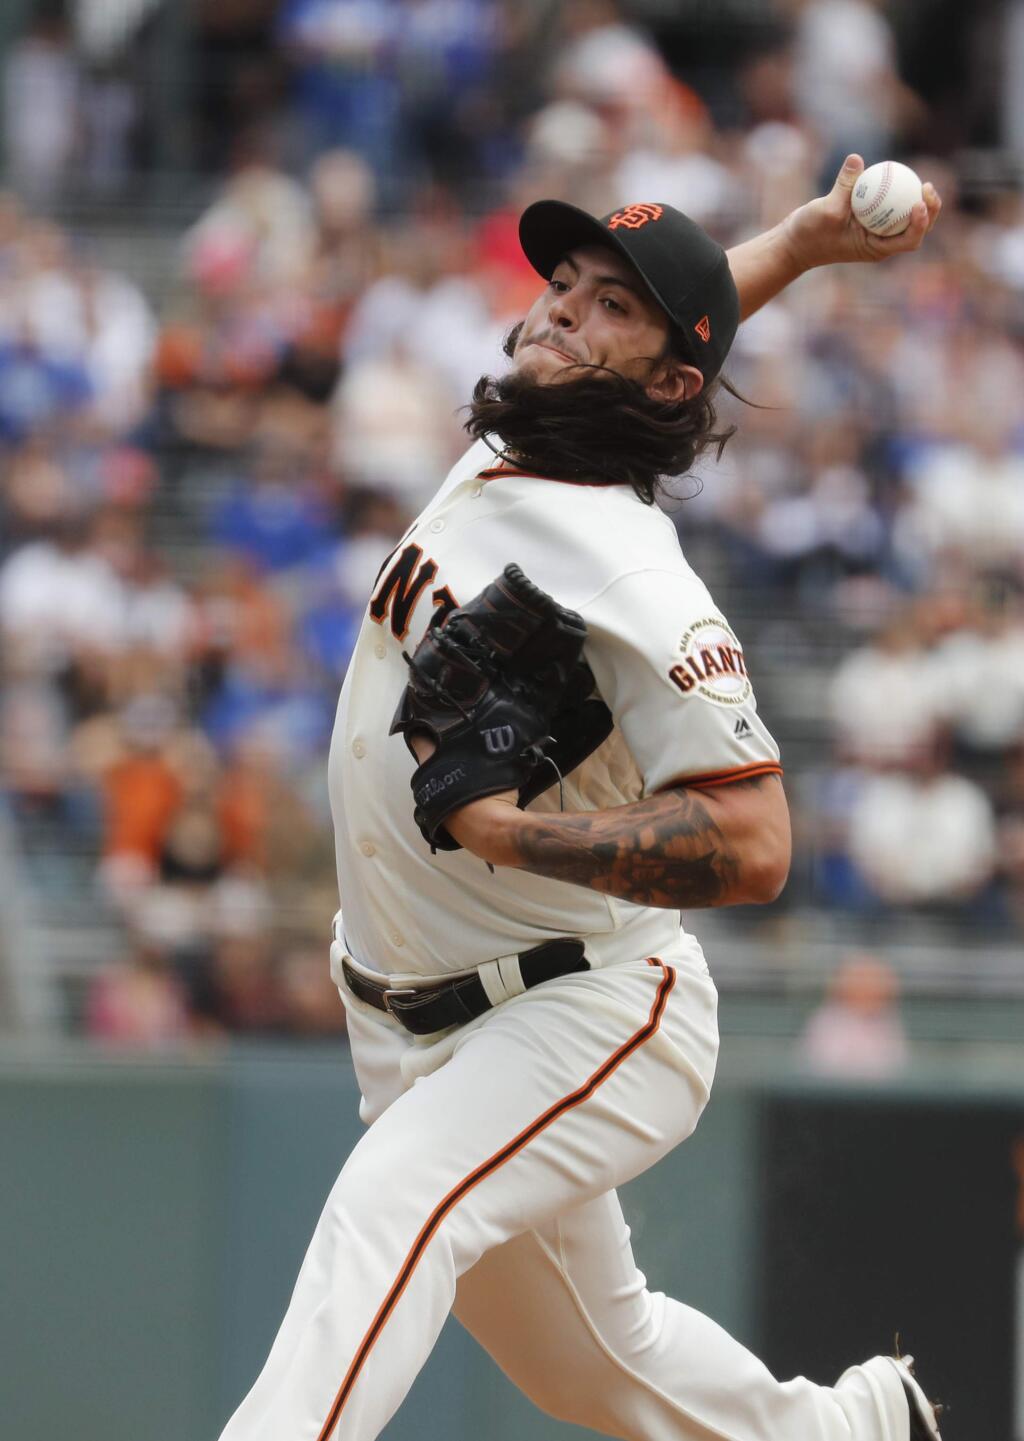 San Francisco Giants starting pitcher Dereck Rodriguez (57) throws against the Los Angeles Dodgers during the first inning of a baseball game in San Francisco, Saturday, Sept. 29, 2018. (AP Photo/Jim Gensheimer)